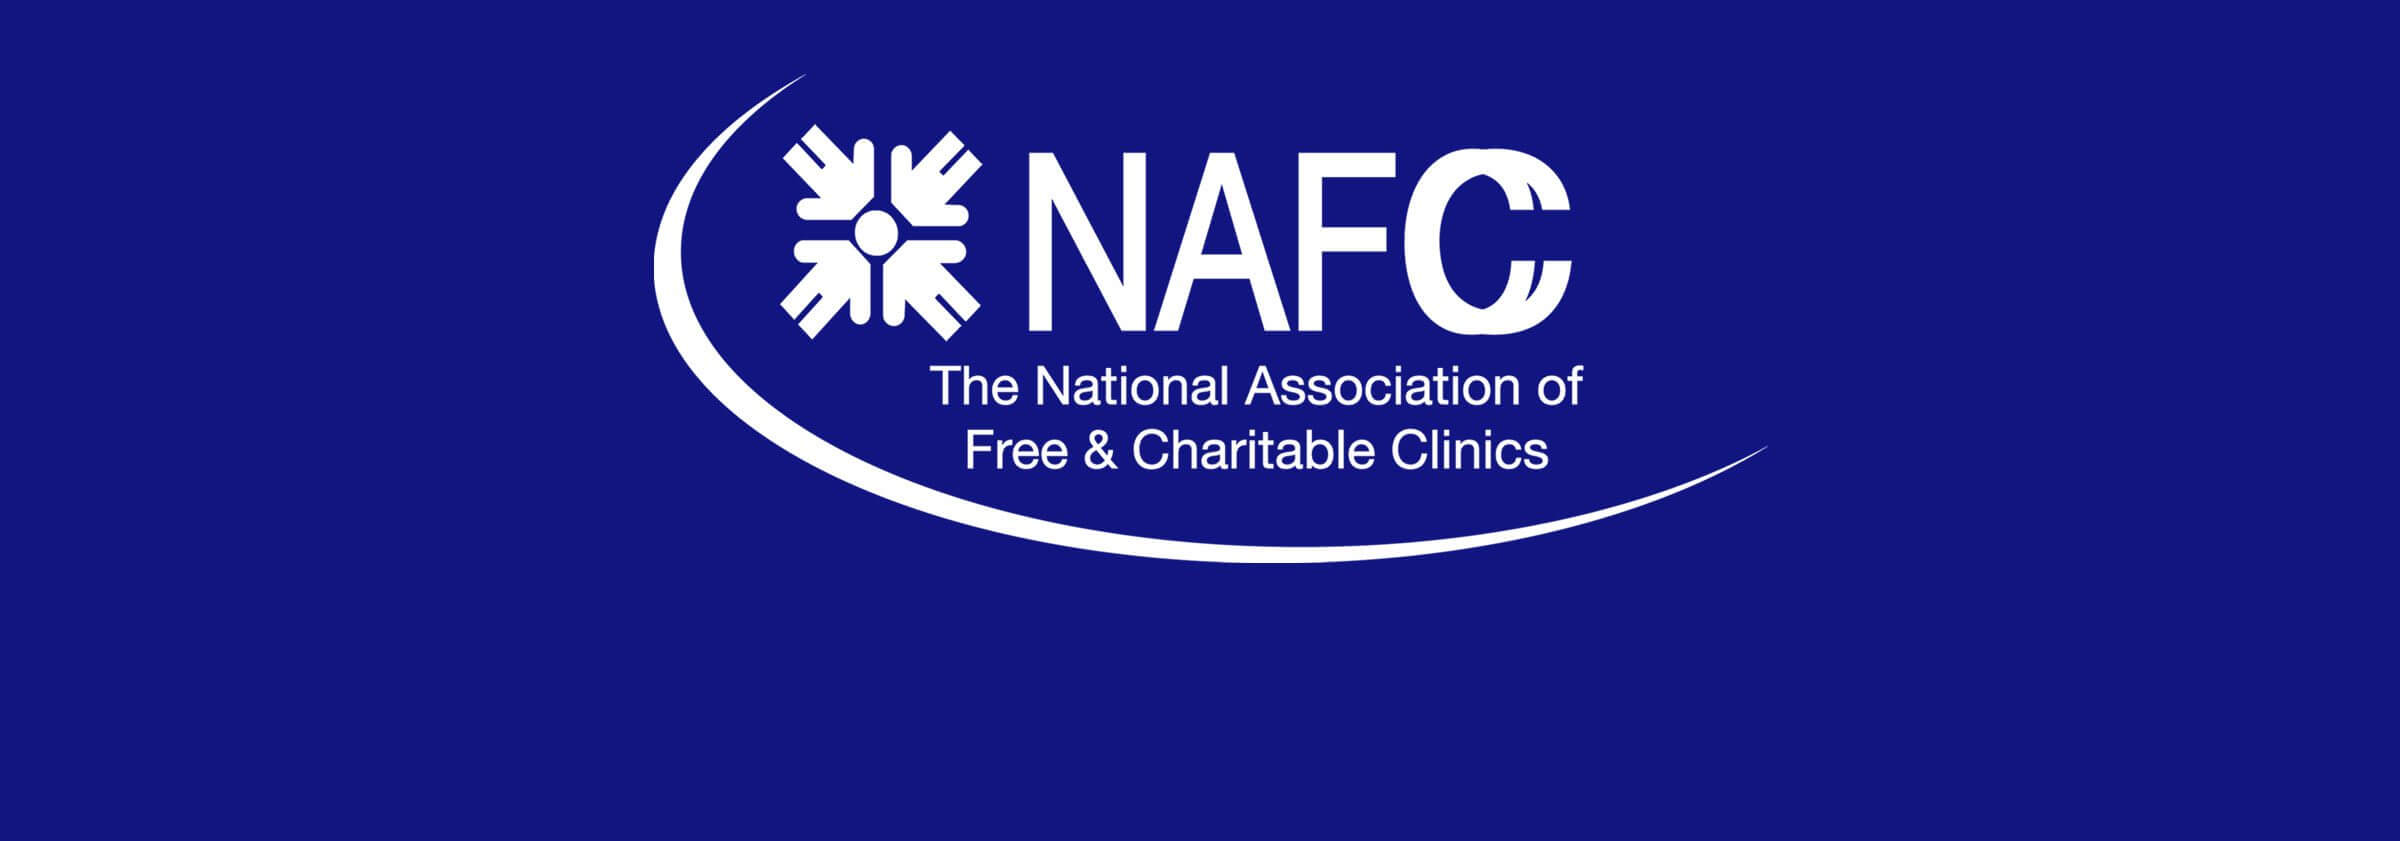 NAFC Statement on the House Labor-HHS Appropriations Bill